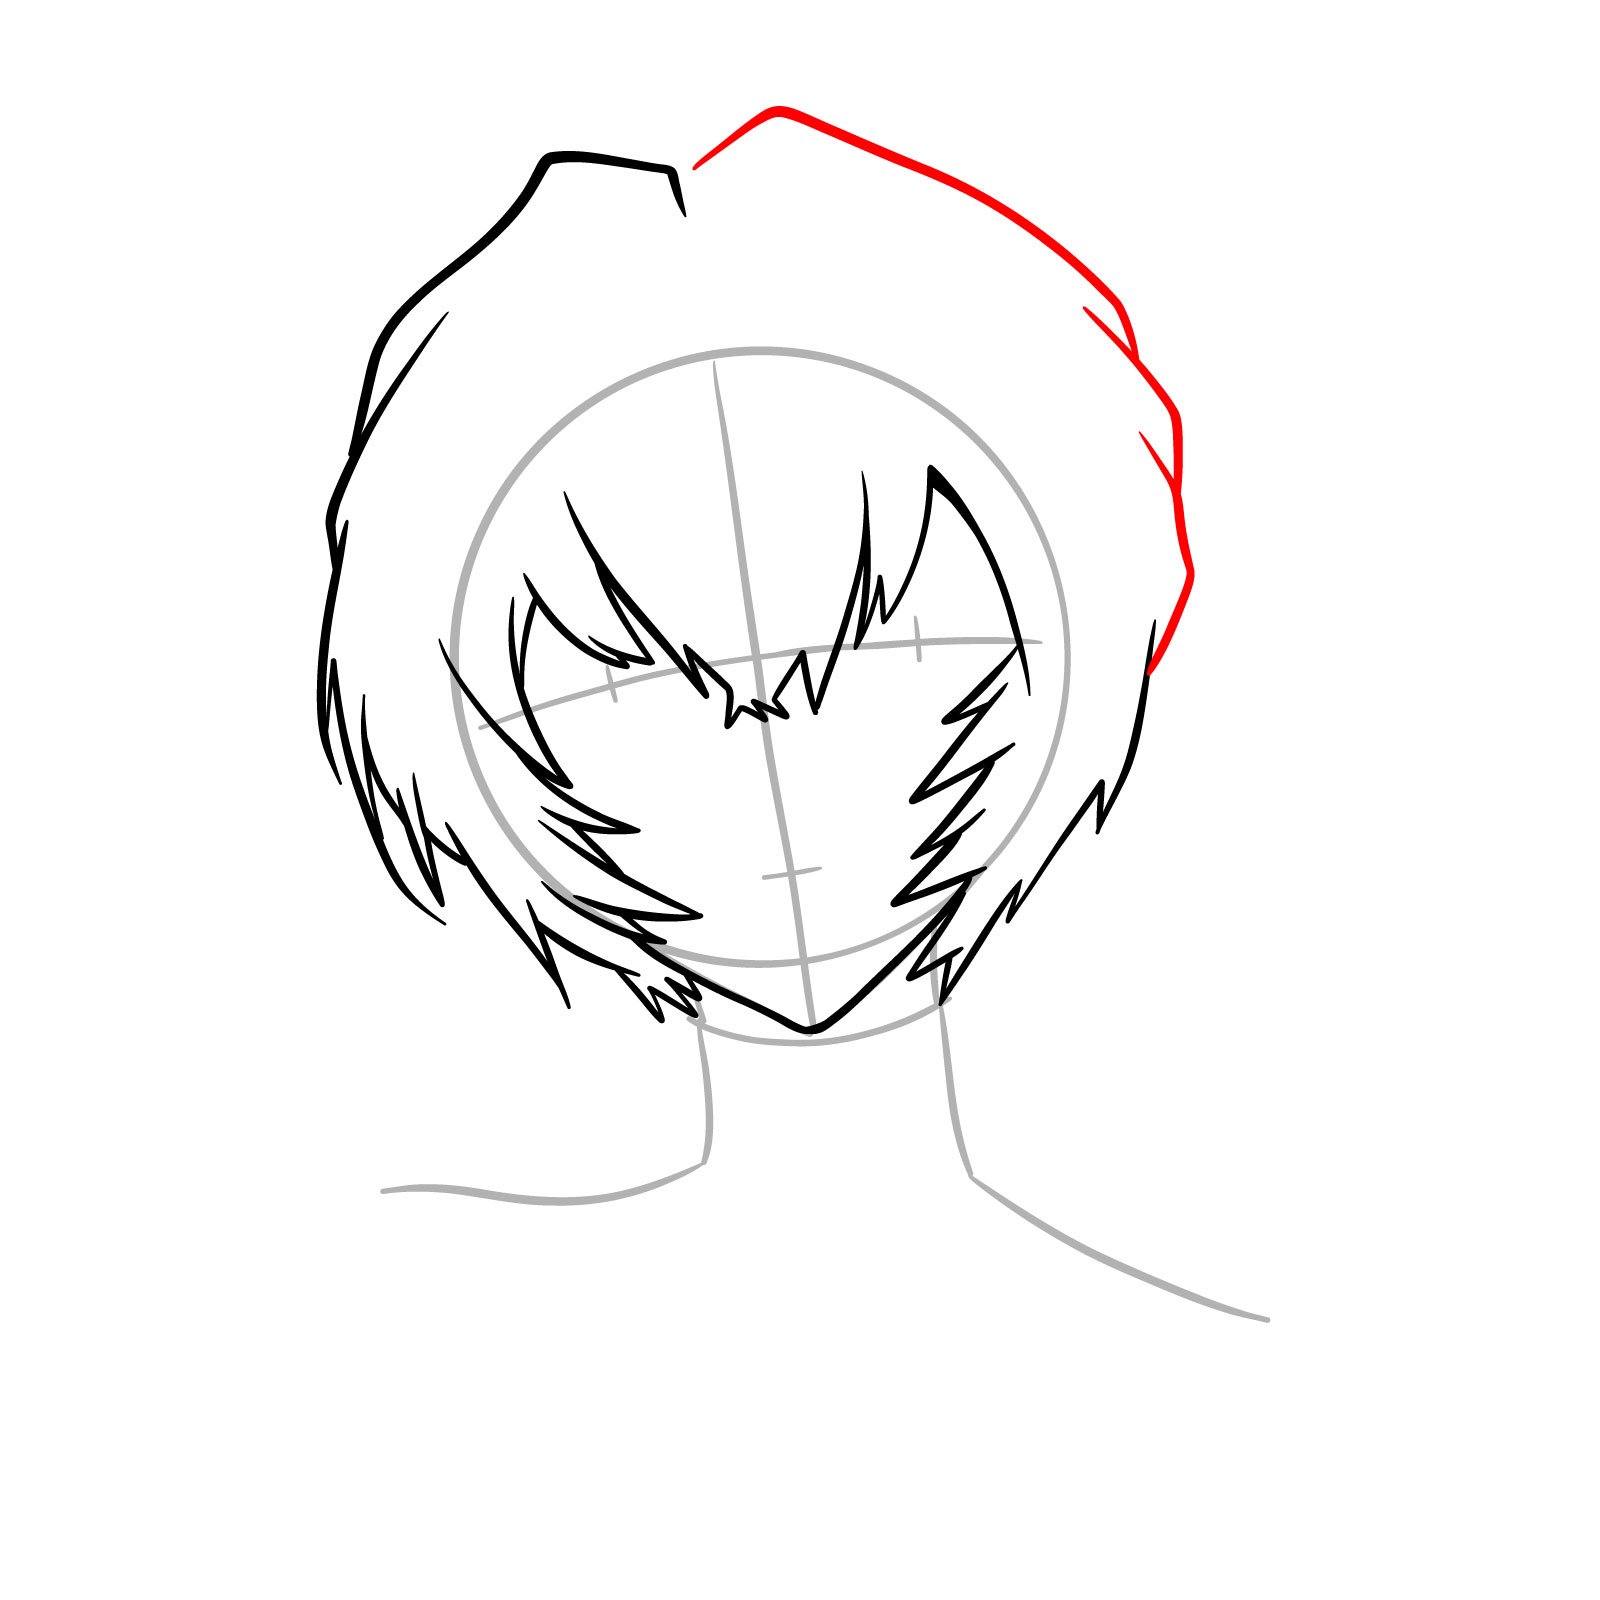 How to draw Rei Ayanami's face - Evangelion - step 08